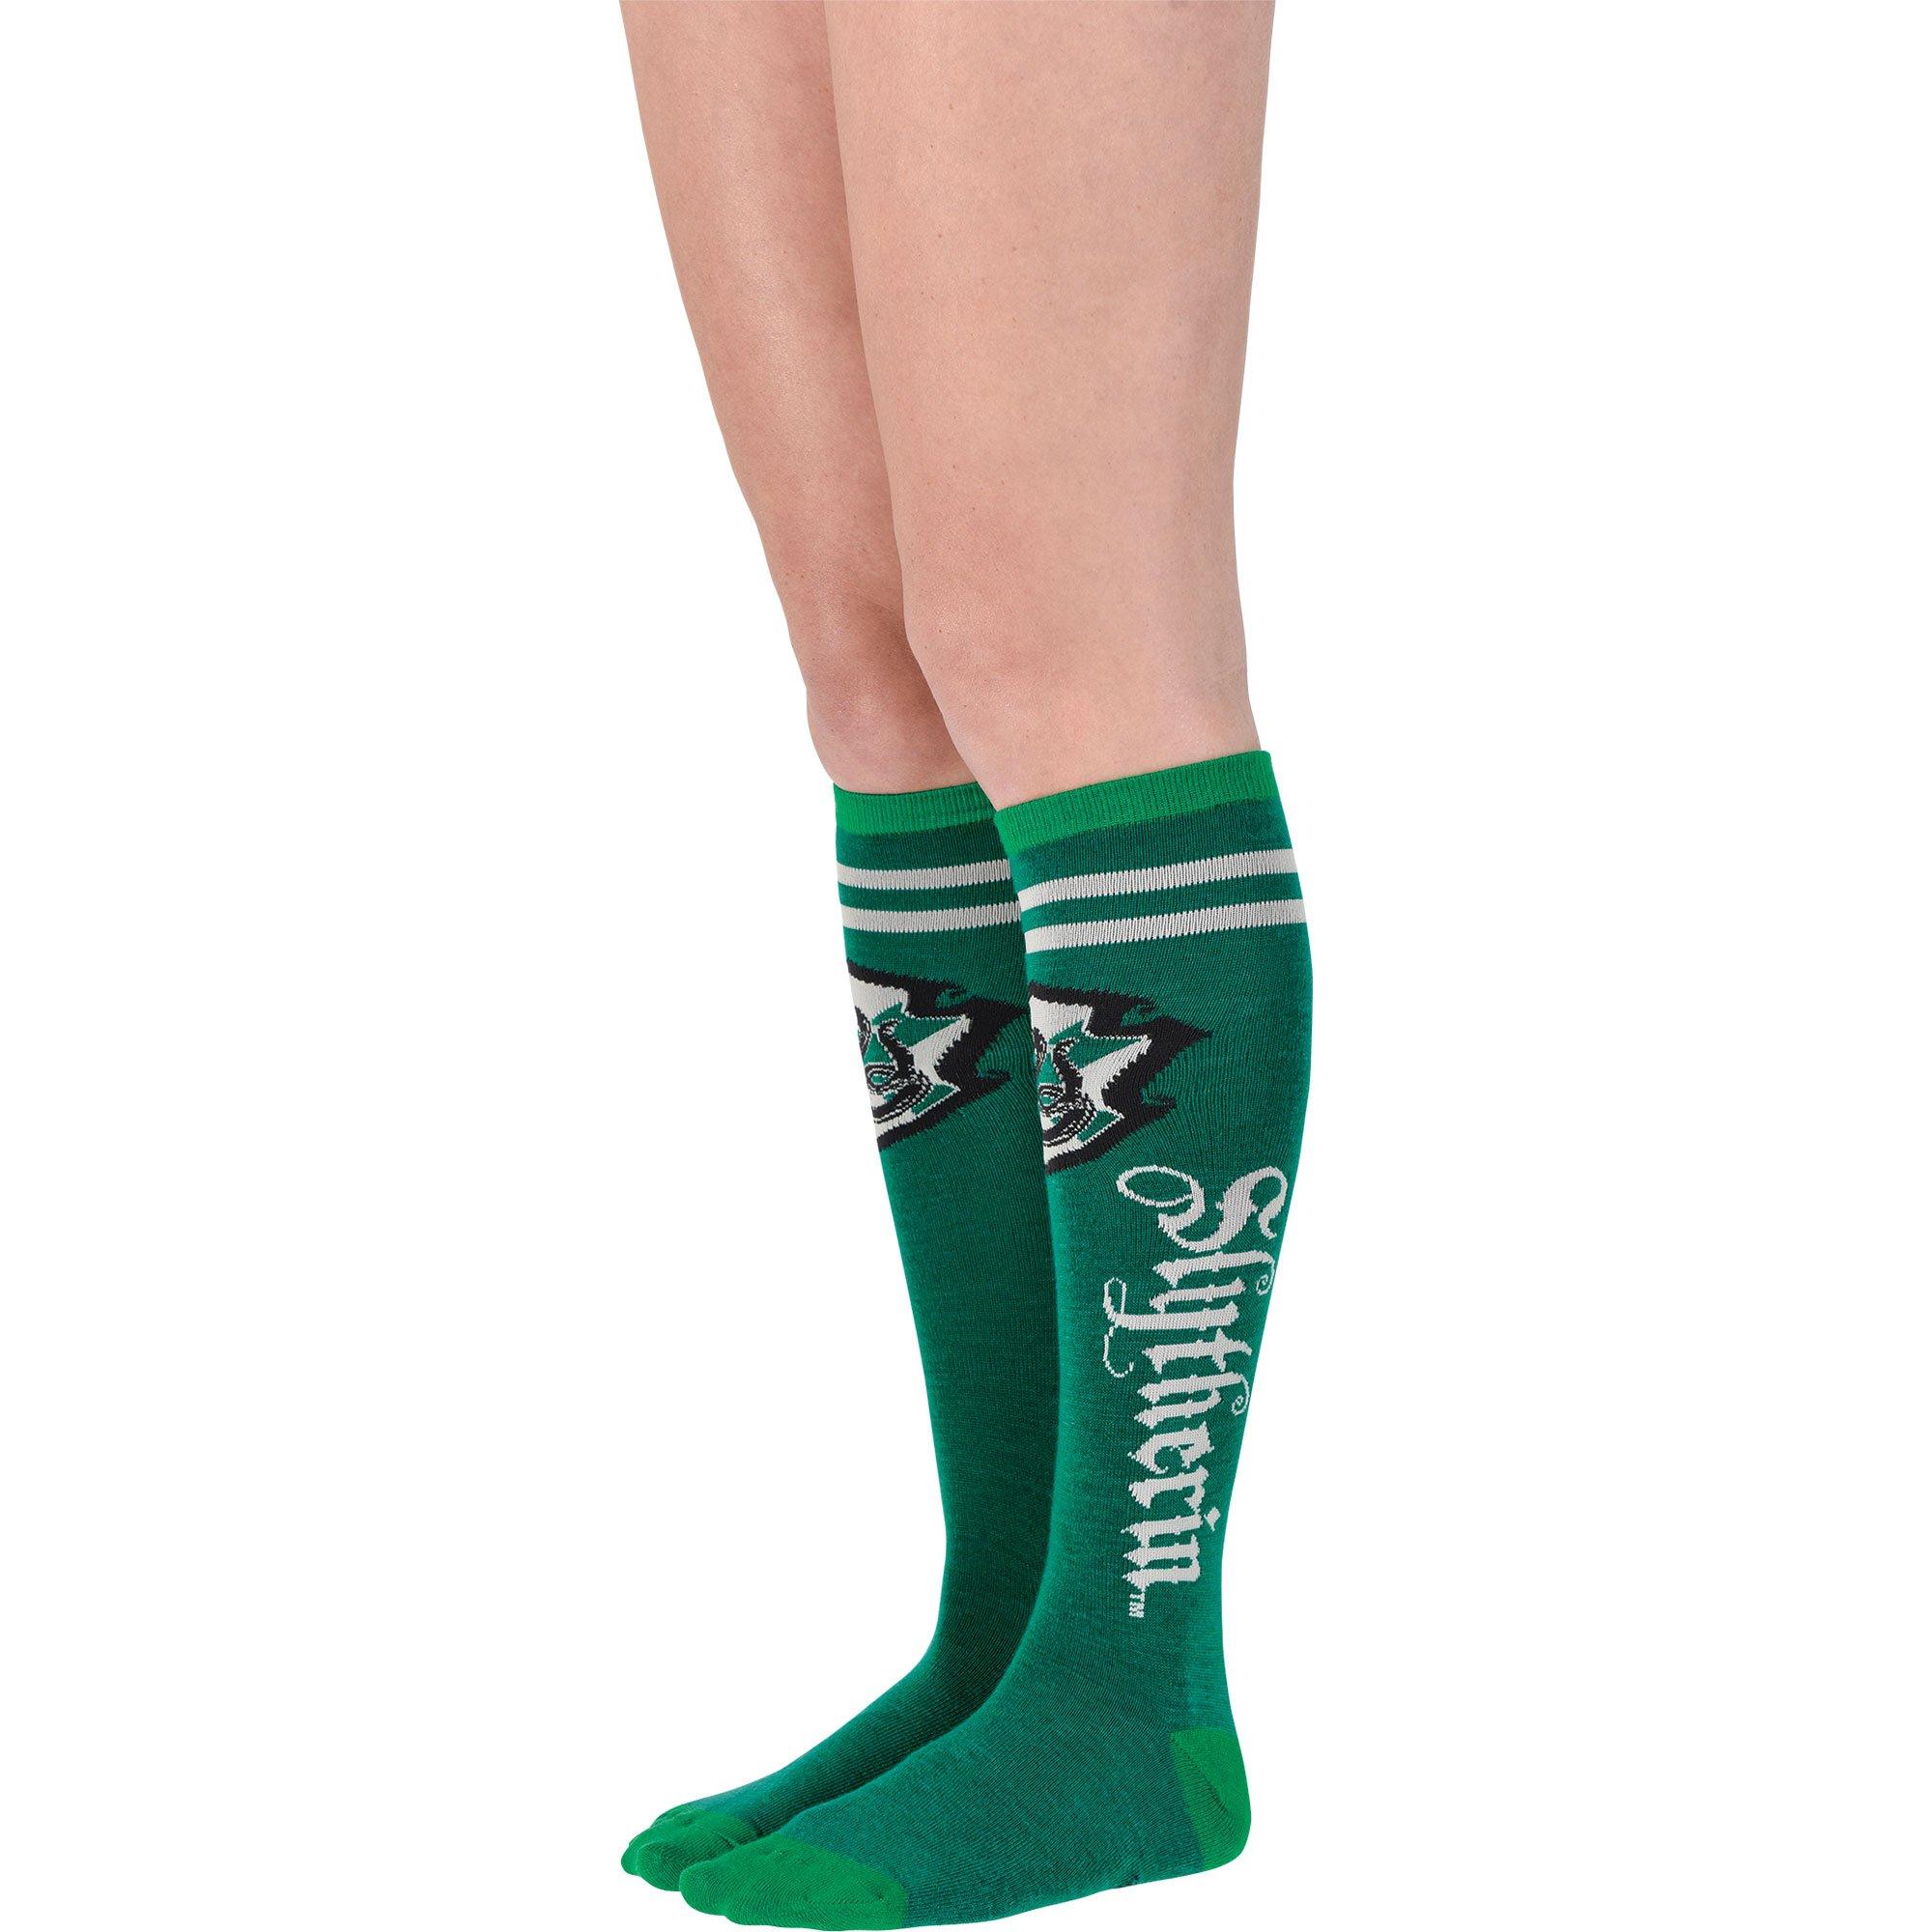 .com: Party City Slytherin Robe Halloween Costume for Adults